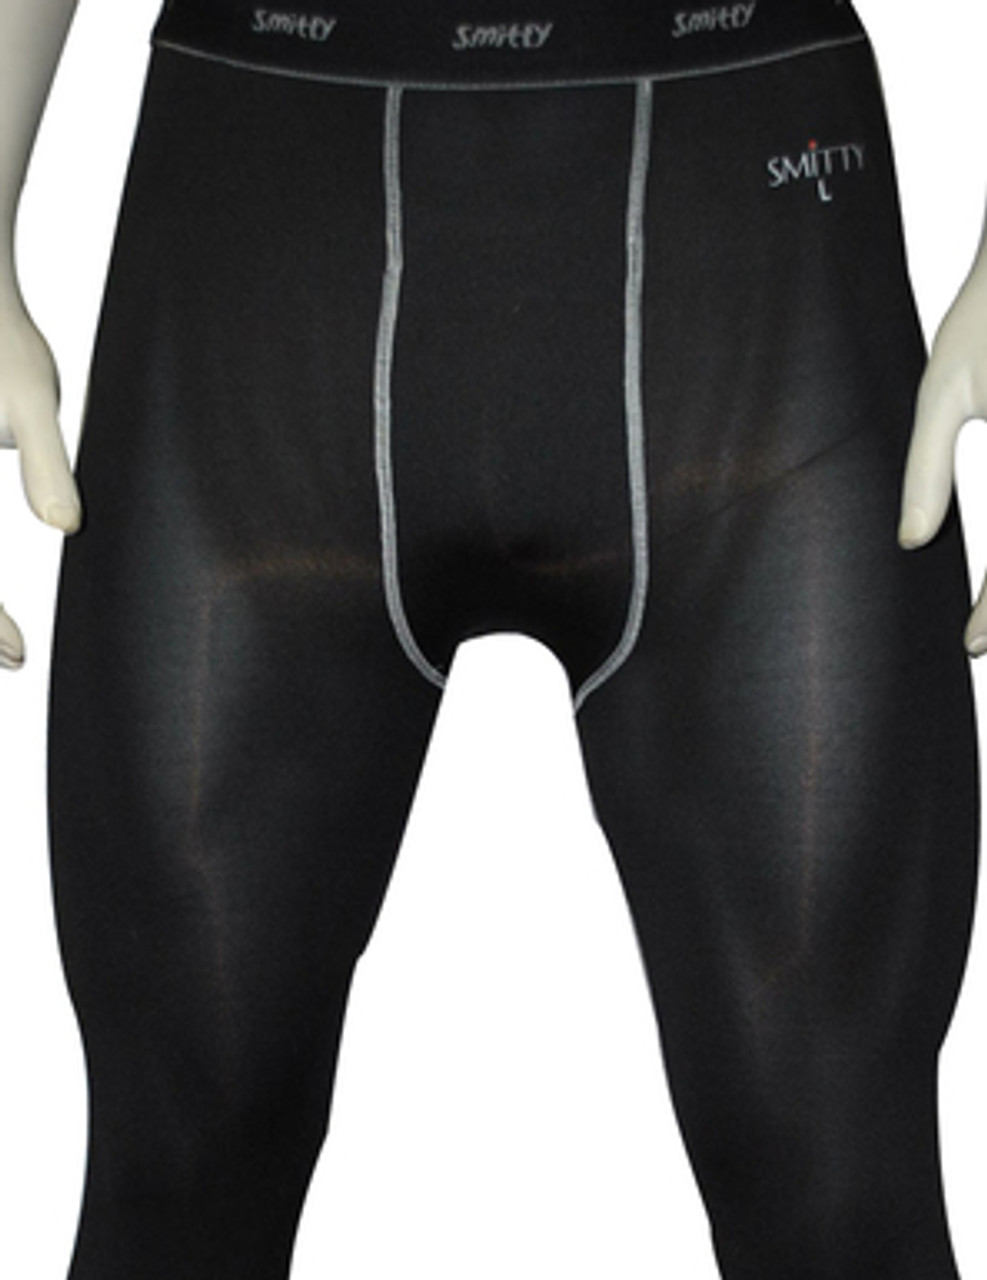 Football Official Compression Shorts